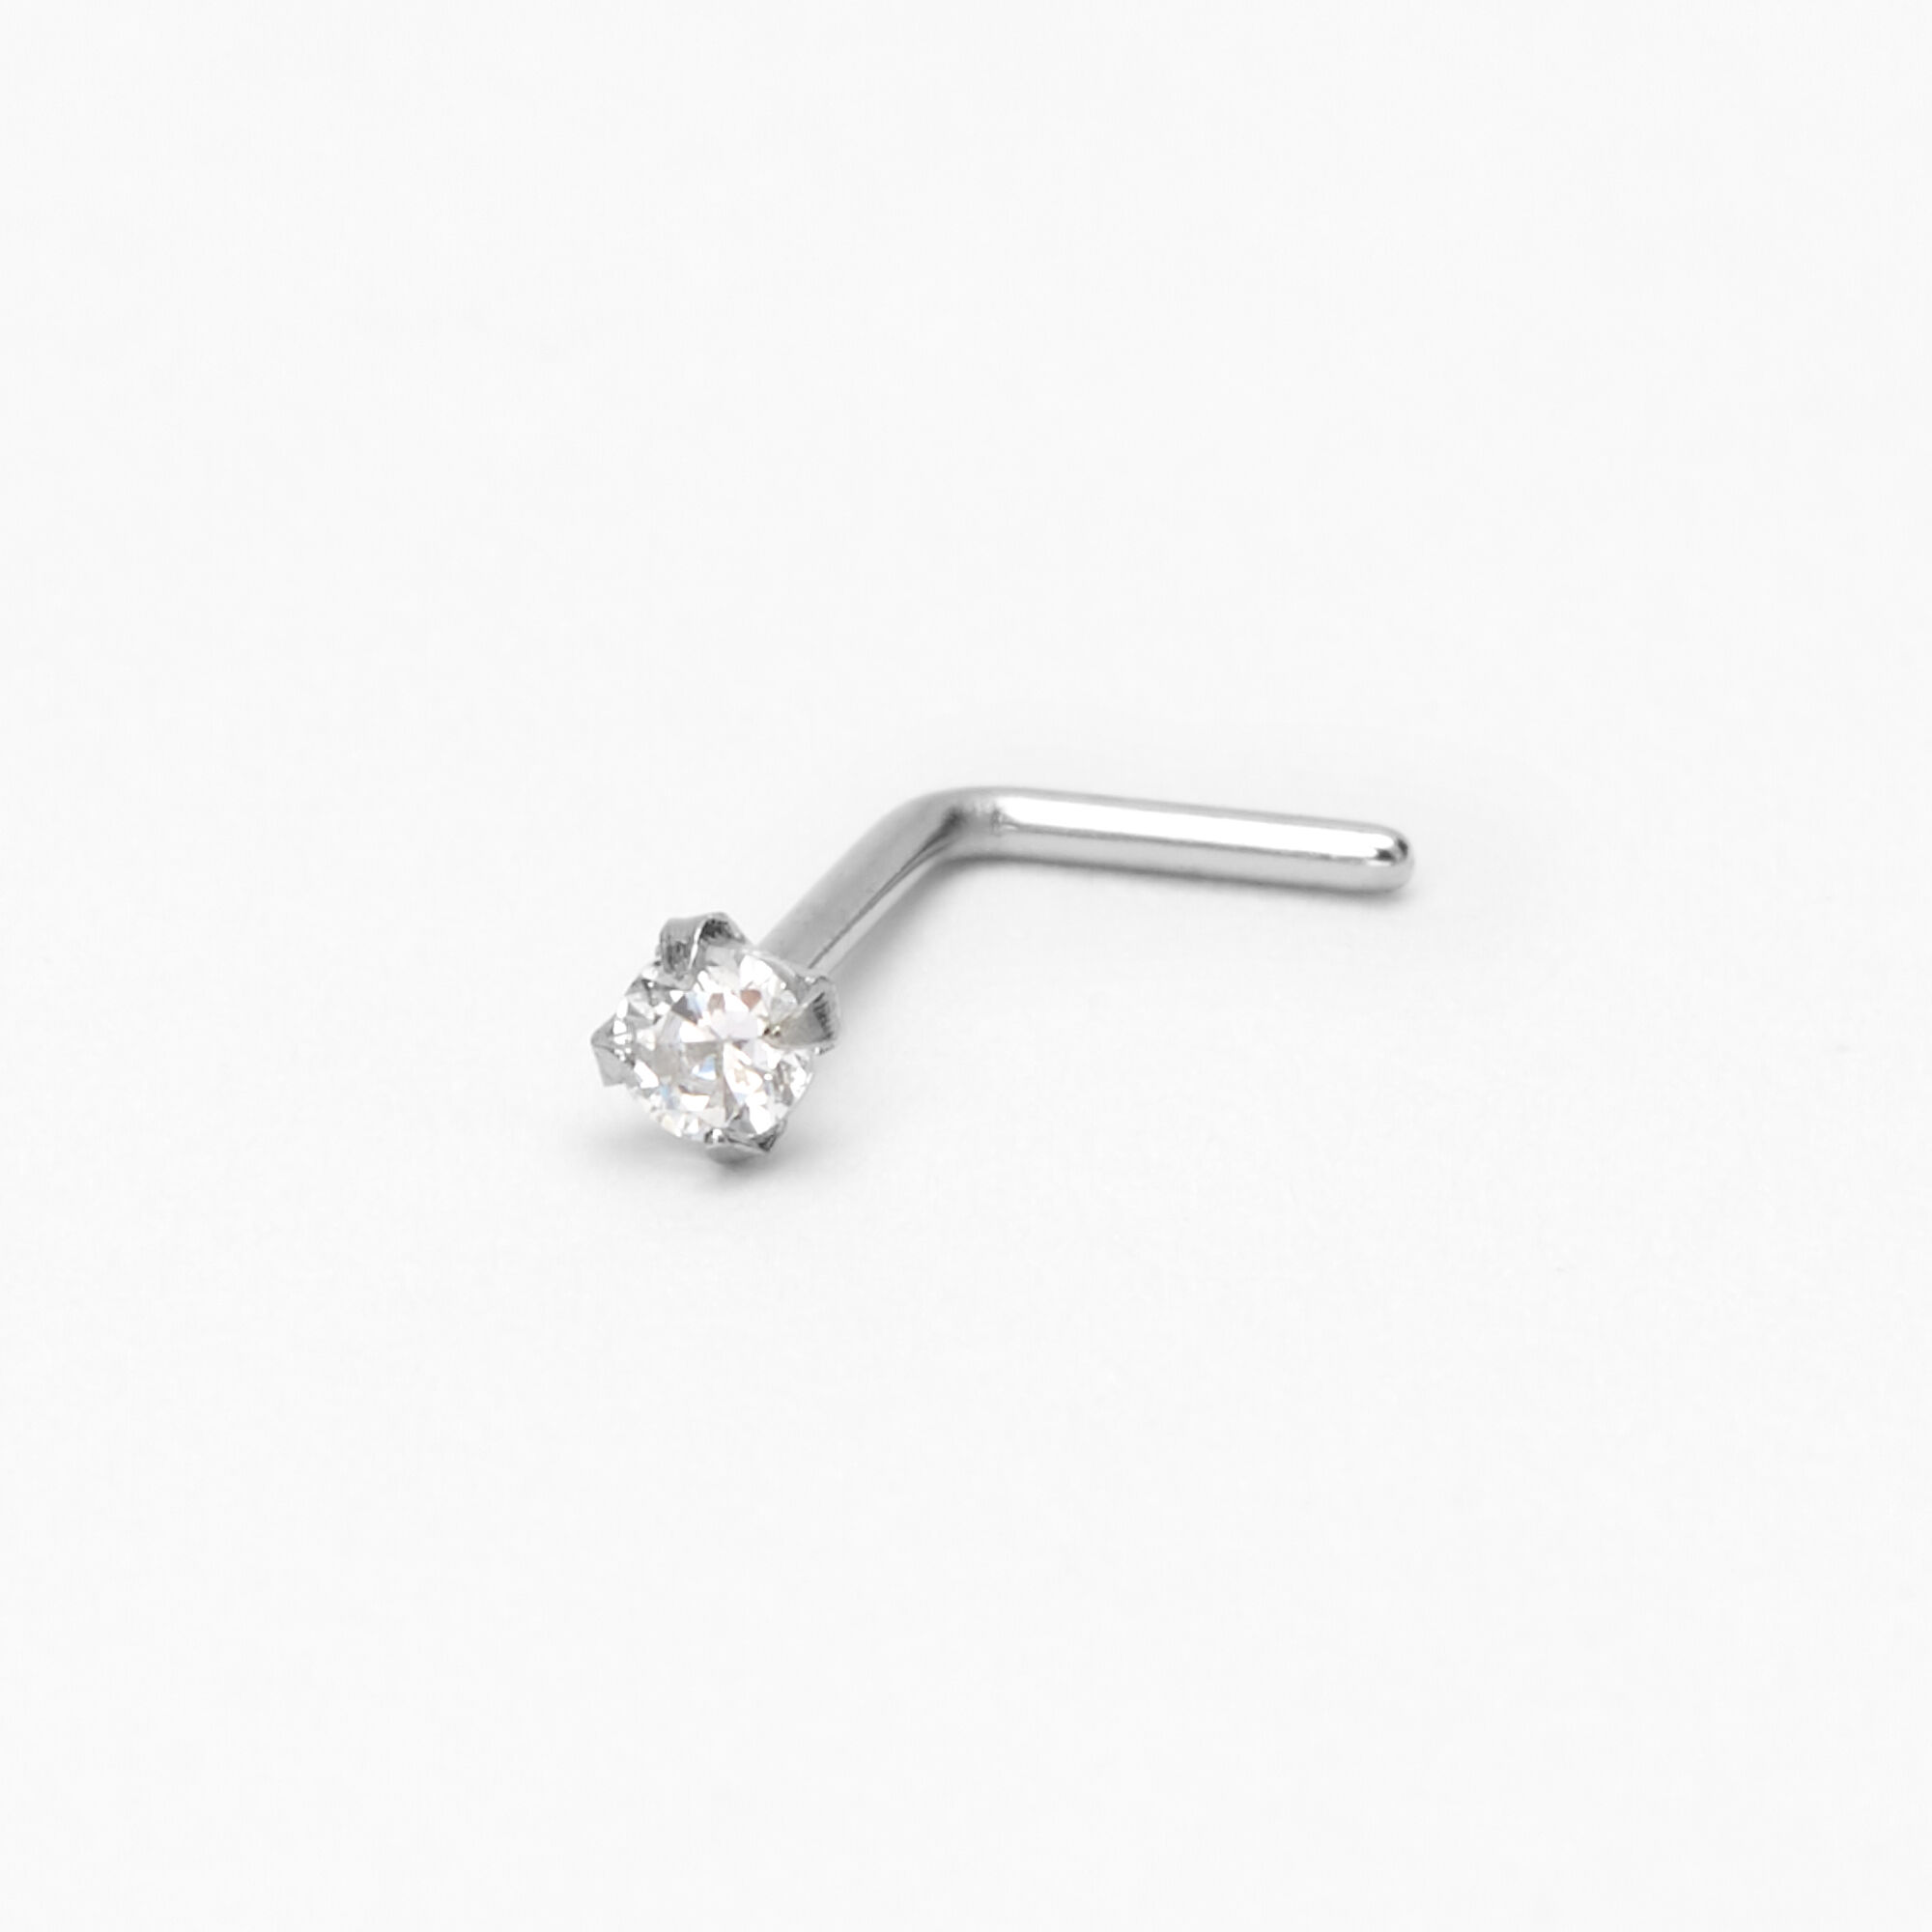 View Claires 20G Basic Crystal Nose Stud Silver information